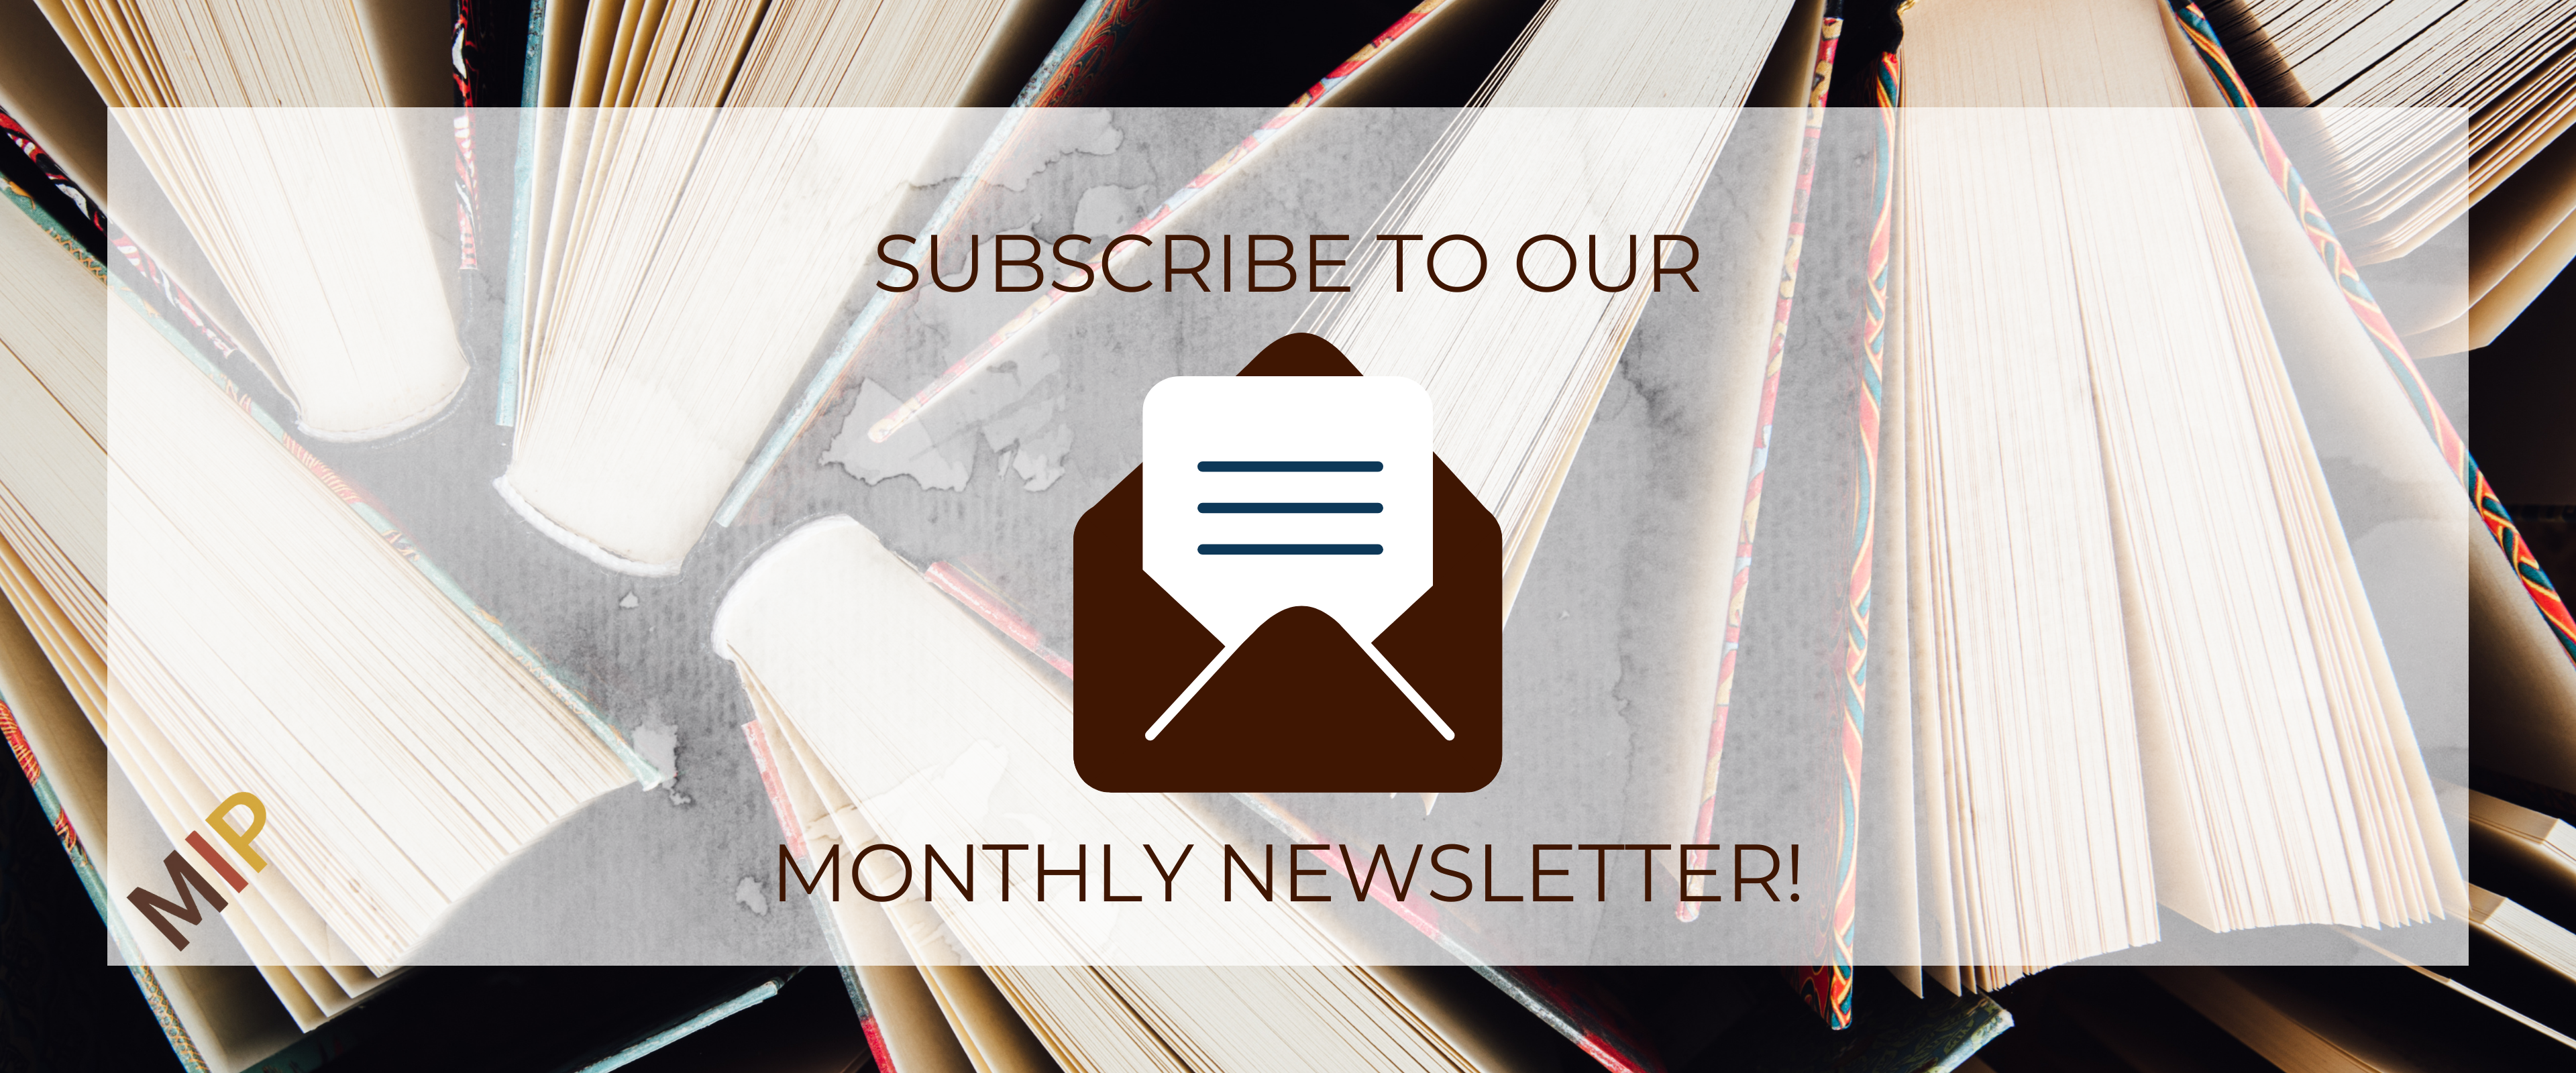 The words "Subscribe to our monthly newsletter" in brown, above an icon of an envelope. In the background are a variety of books standing on end, photographed from above.